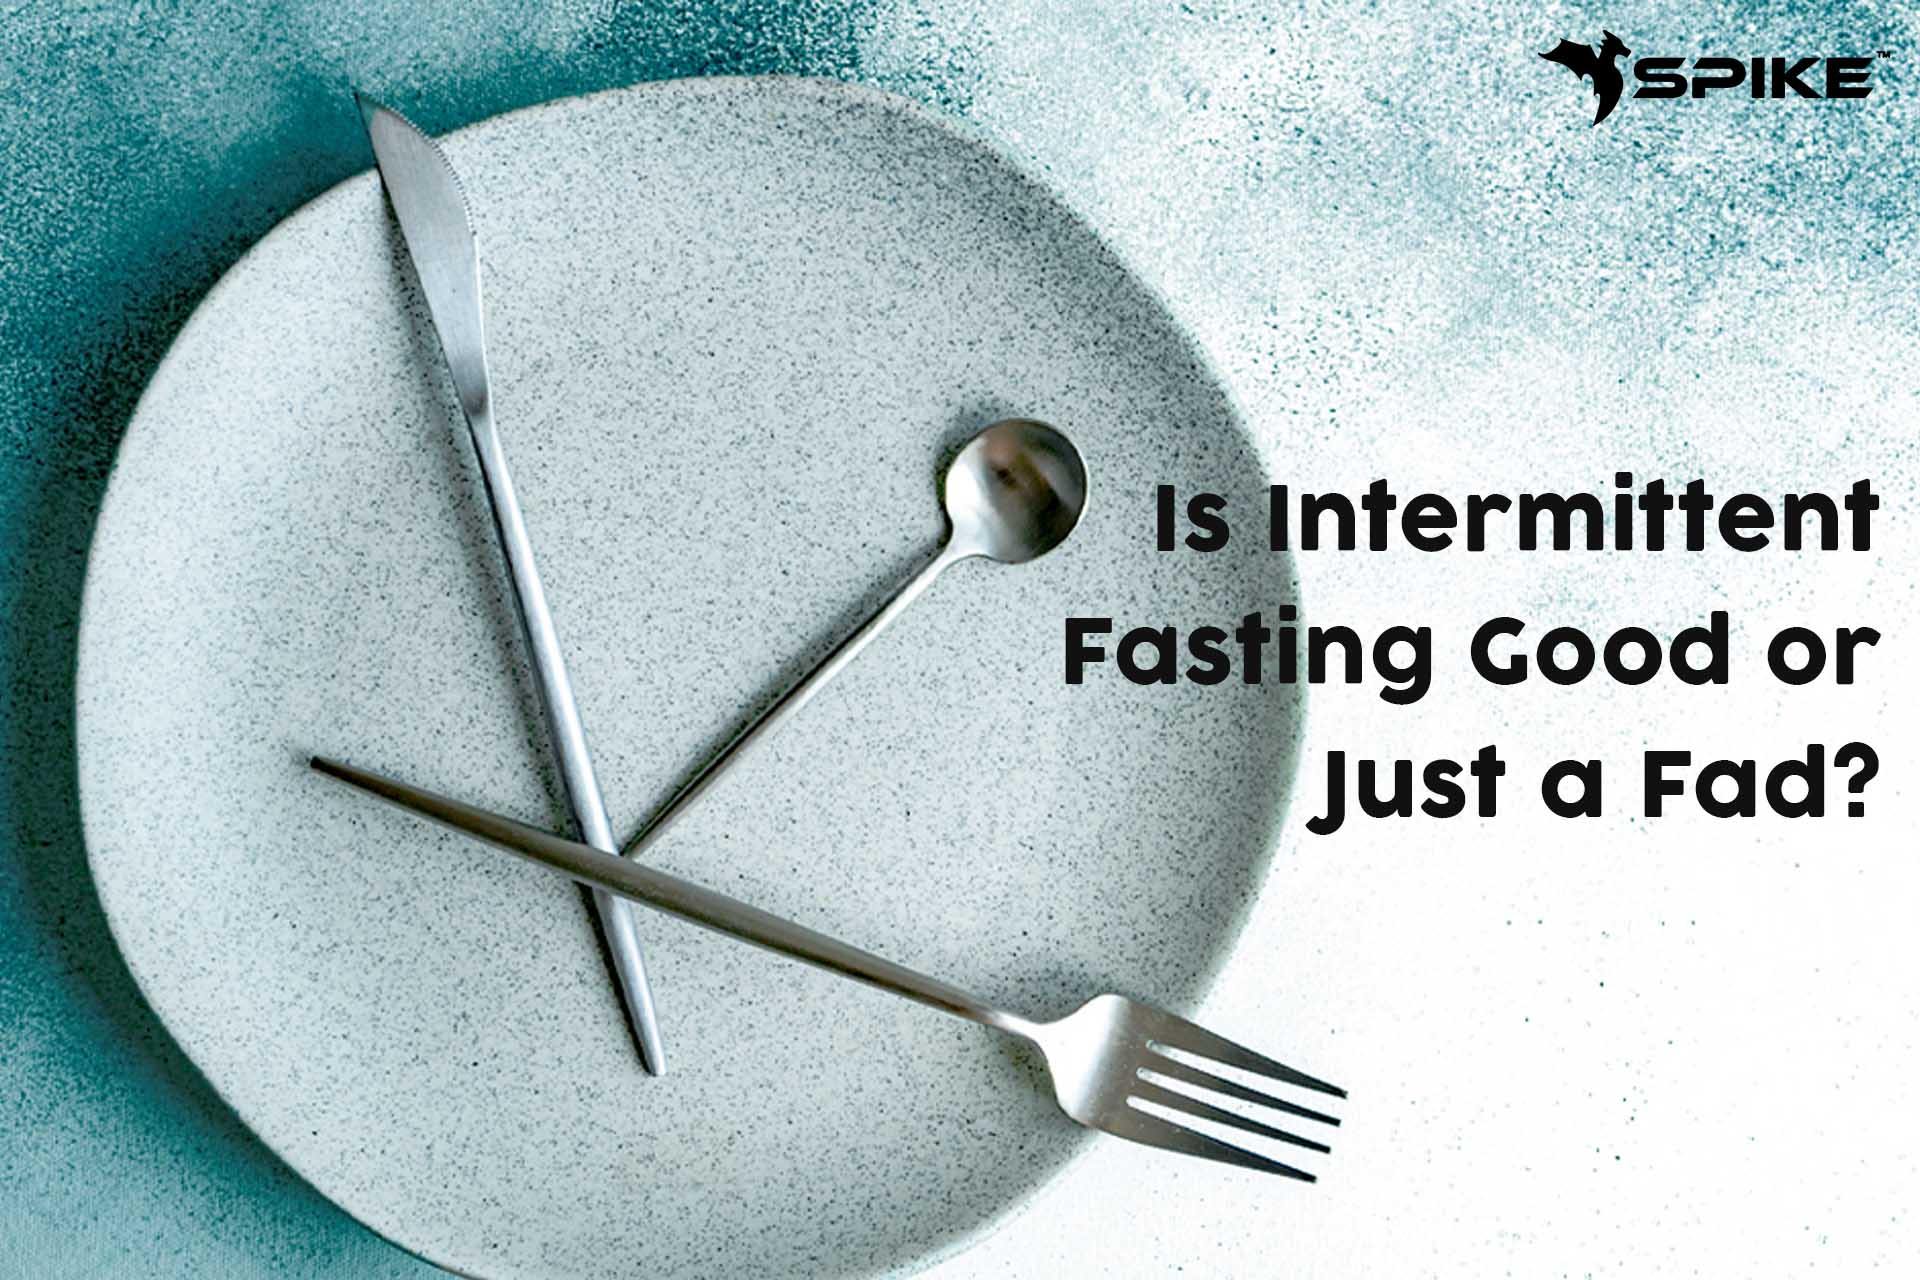 Is Intermittent Fasting Good or Just a Fad? - Spike